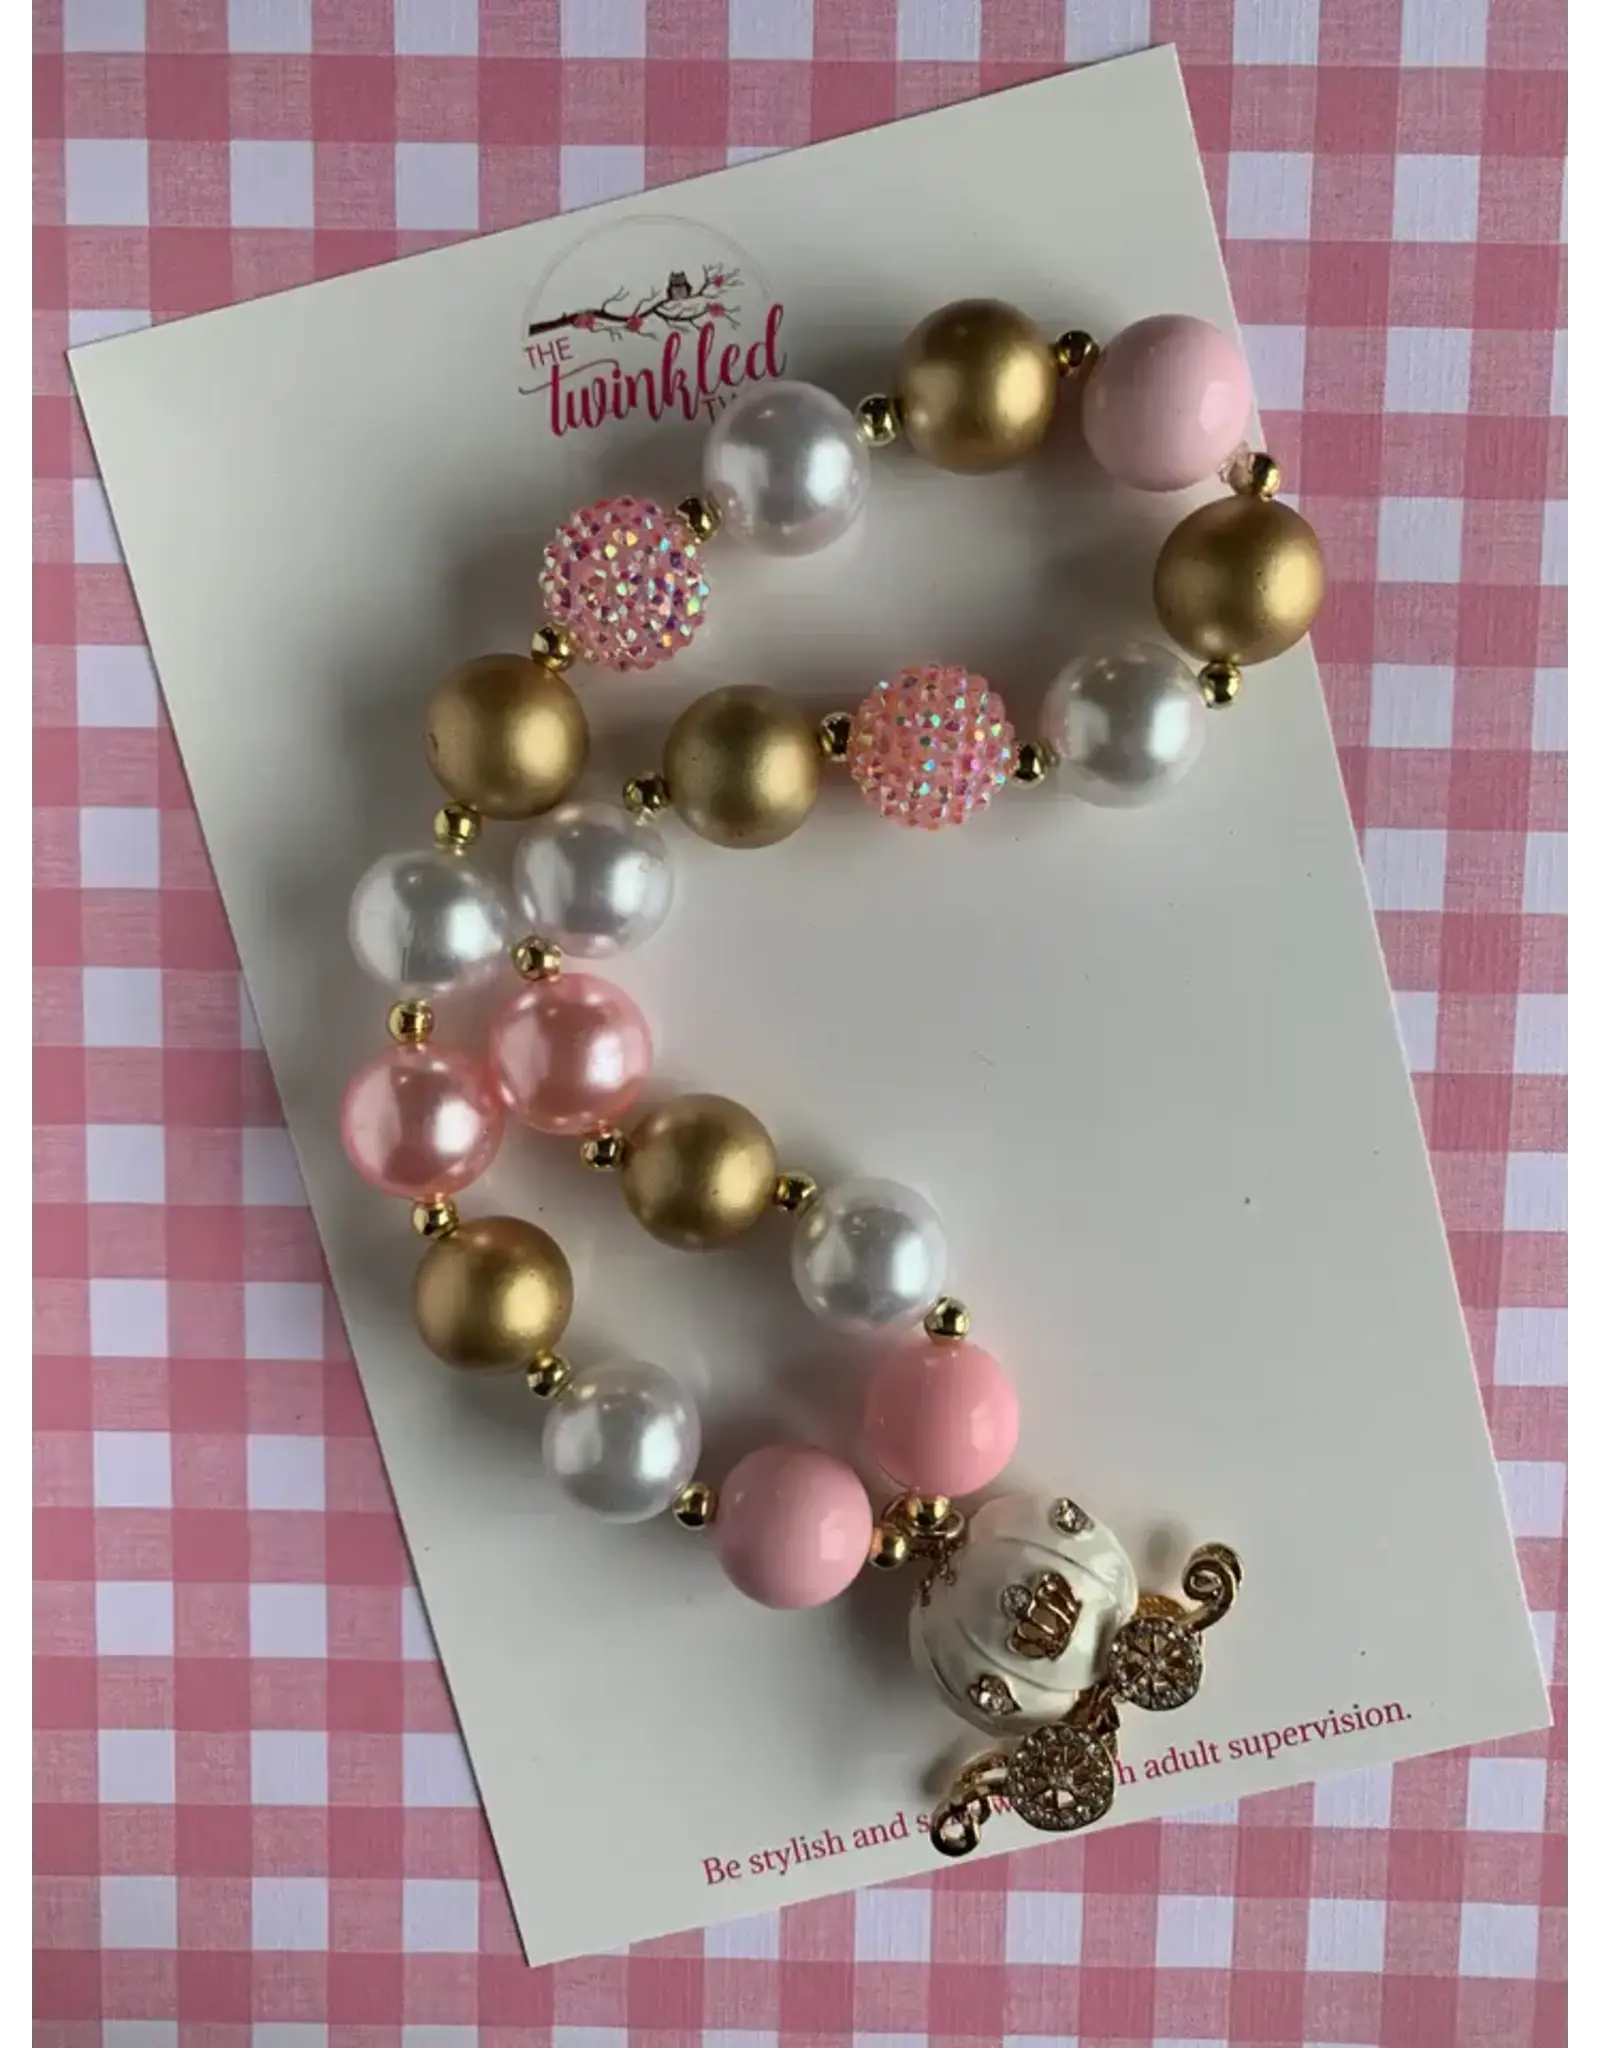 The Twinkled Twig Cinderella Necklace